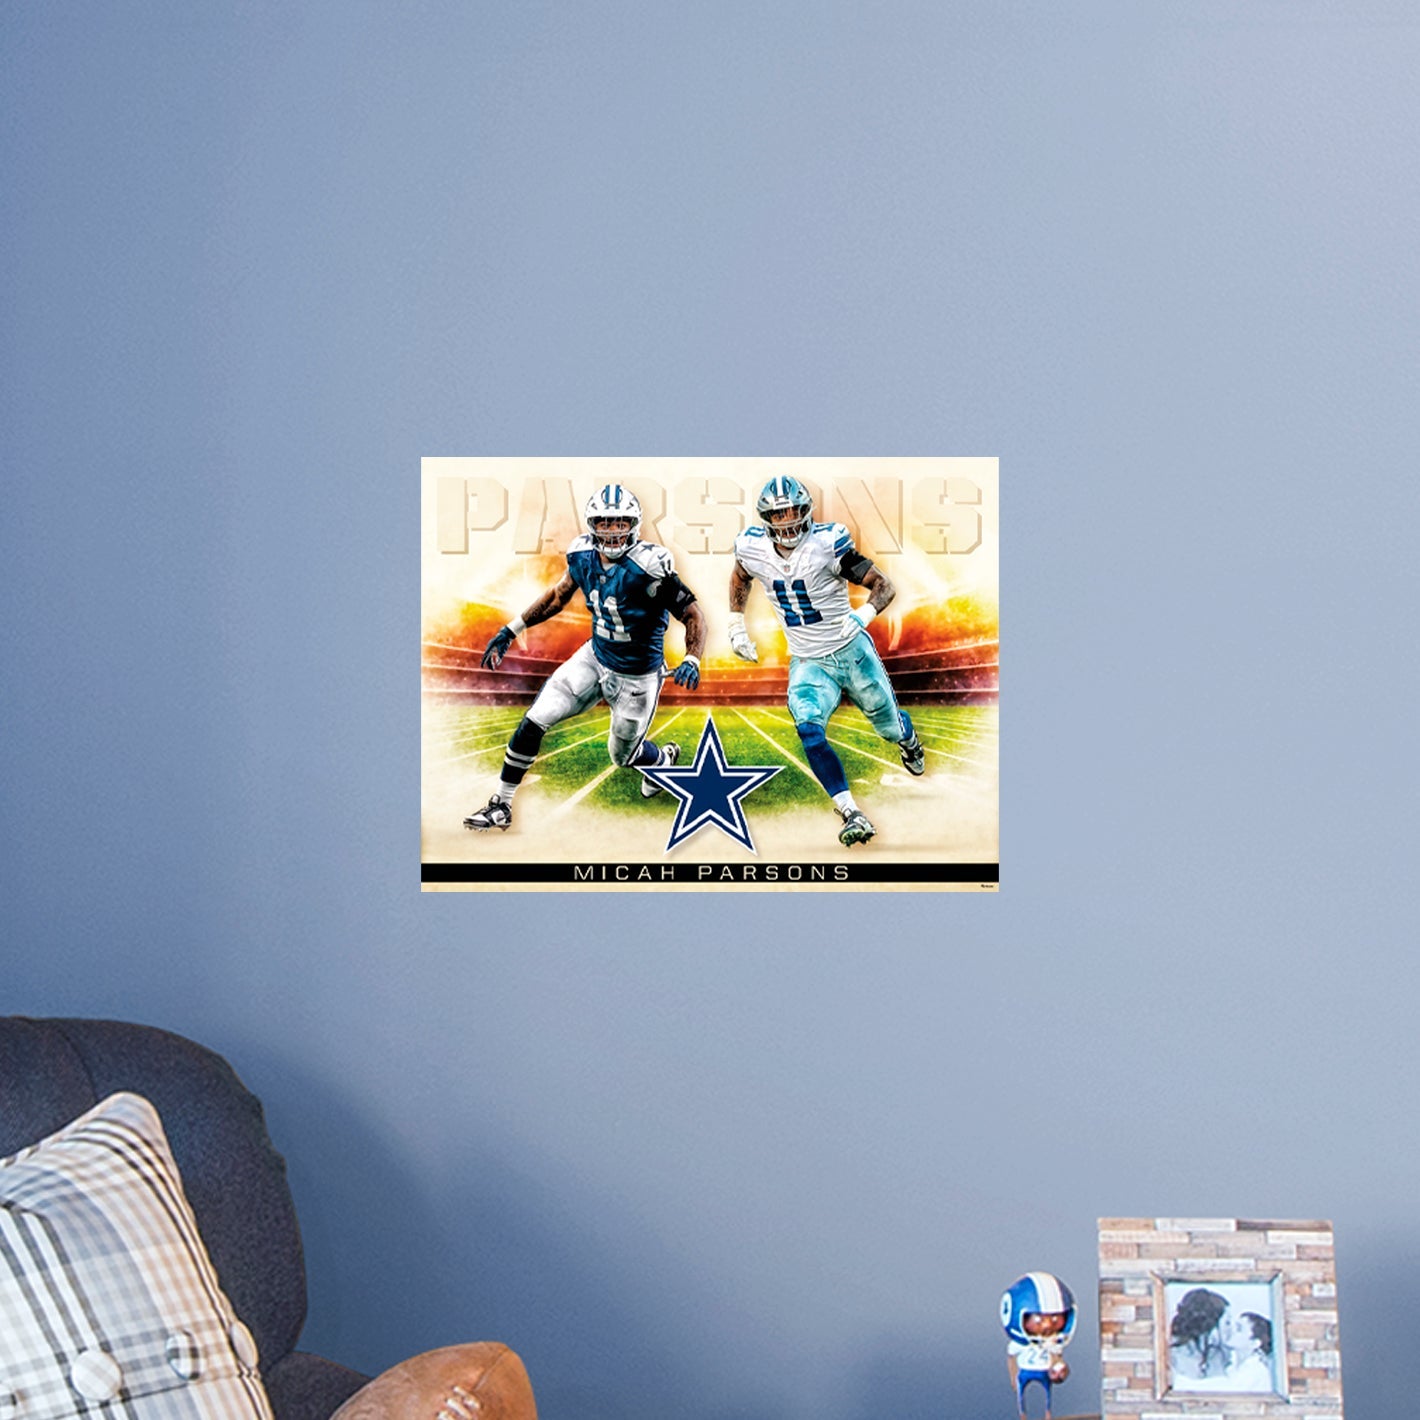 Dallas Cowboys: Micah Parsons Icon Poster - Officially Licensed NFL Removable Adhesive Decal